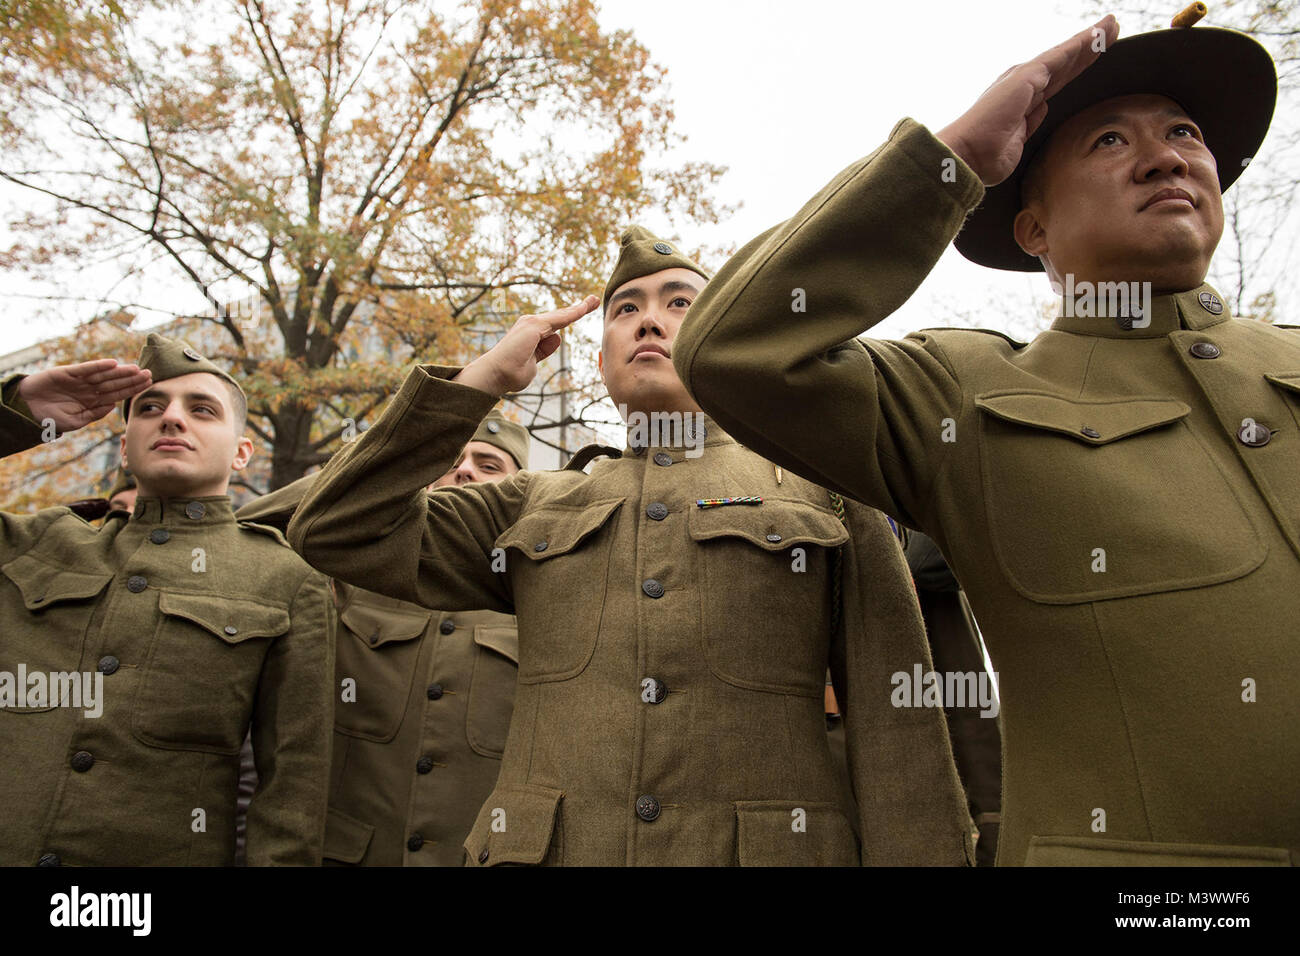 World War I re-enactors salute during the National World War I Memorial groundbreaking ceremony at Pershing Park in Washington, D.C. Nov. 9, 2017. Construction of the memorial is expected to be completed in a year. (DoD photo by EJ Hersom) 171109-D-DB155-004 by DoD News Photos Stock Photo